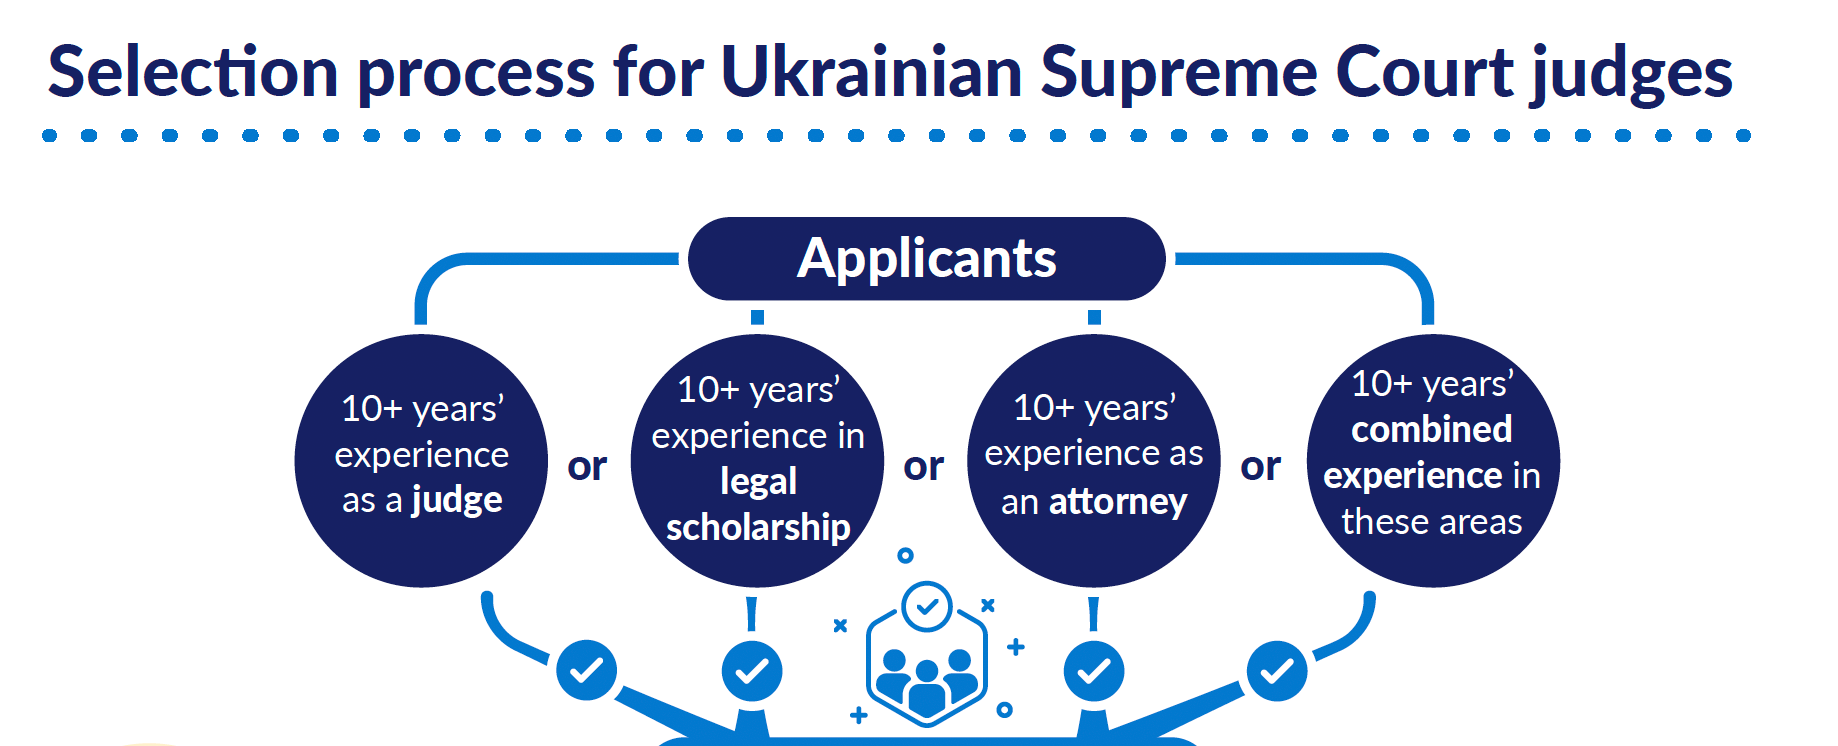 Infographic showing the selection process for Ukrainian Supreme Court judges